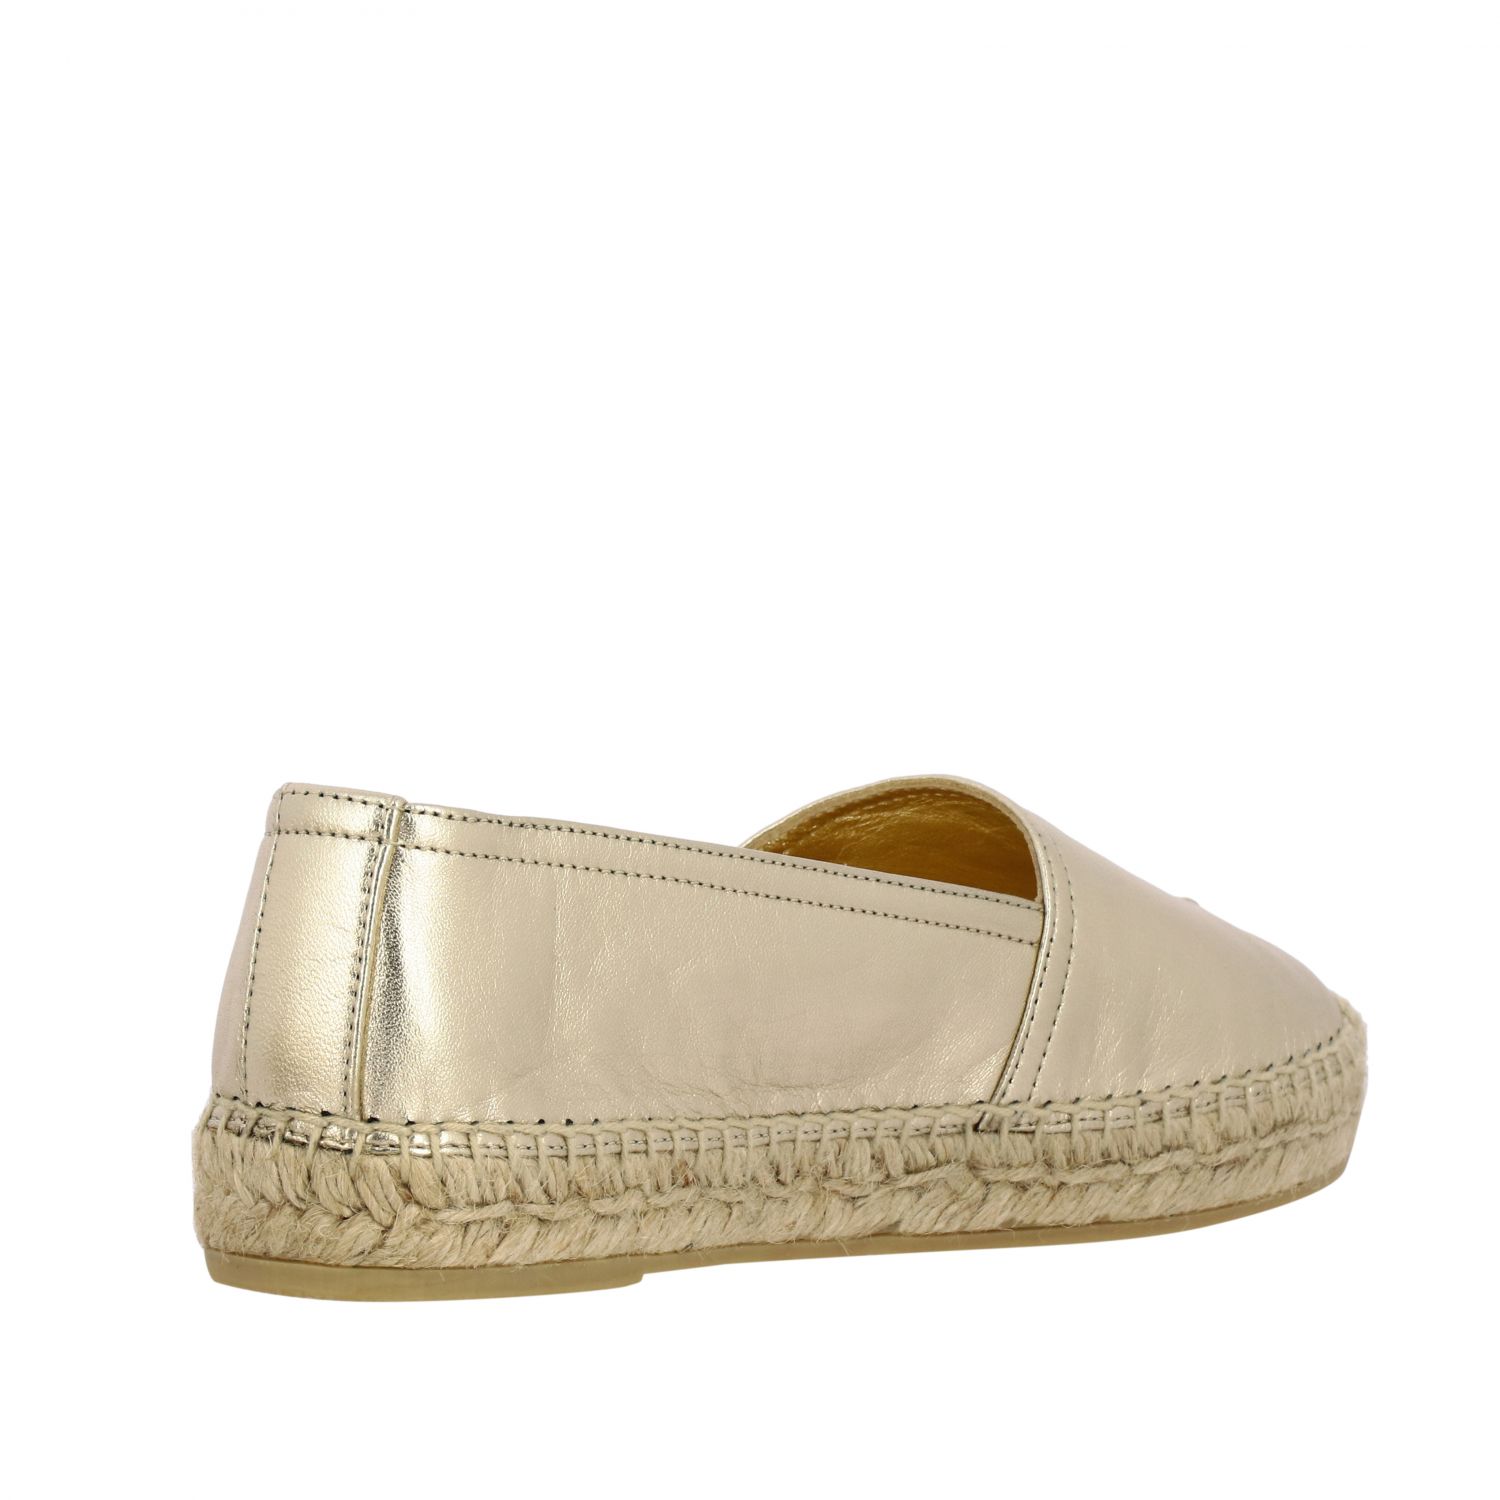 Saint Laurent Outlet: espadrilles in laminated leather with embossed